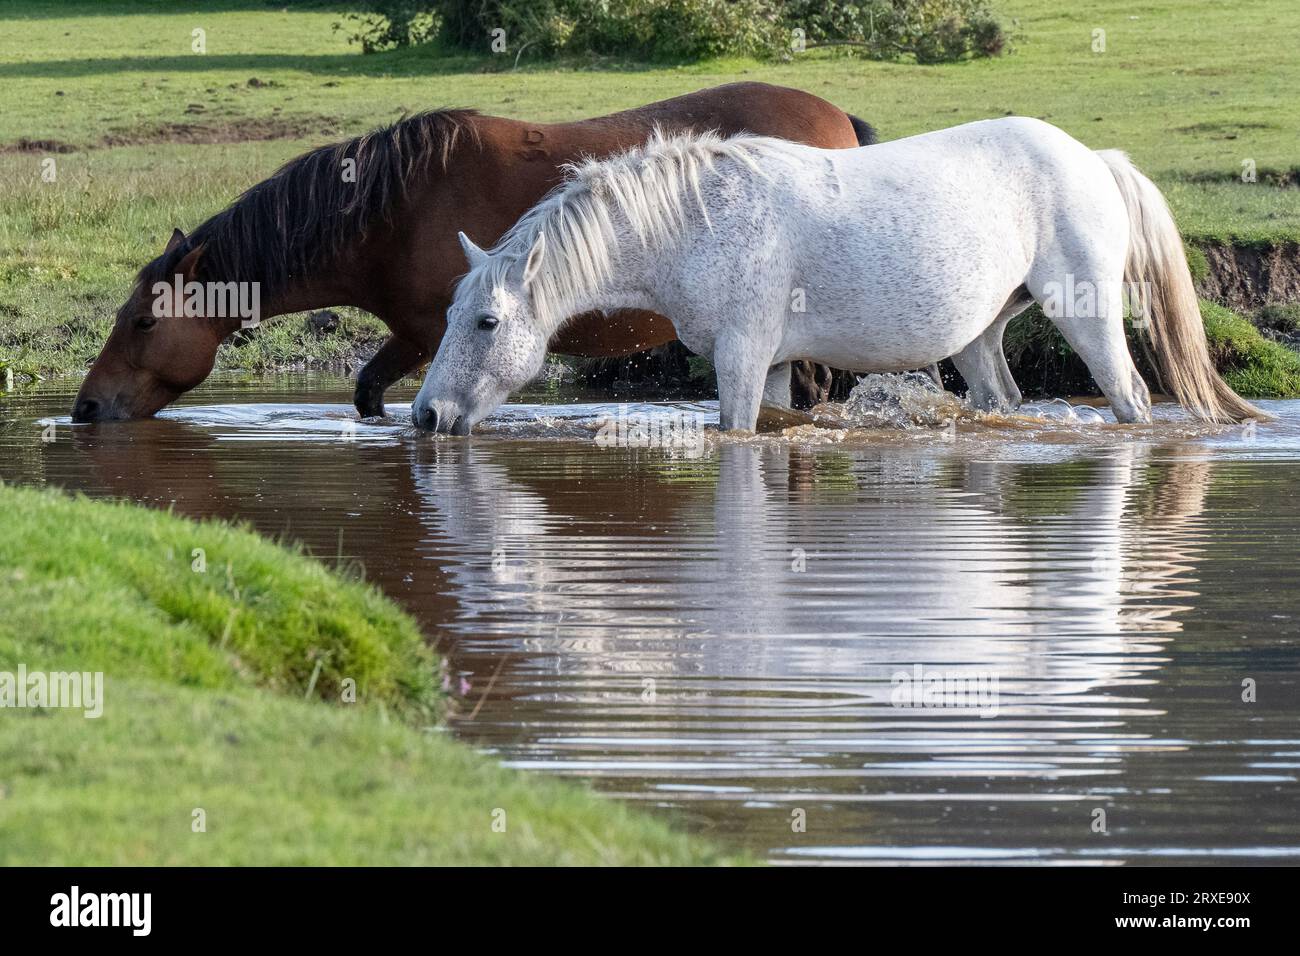 The New Forest National Park, Hampshire, Wild ponies roaming freely in their natural habitat, a chestnut and grey pony drinking and cooling down Stock Photo